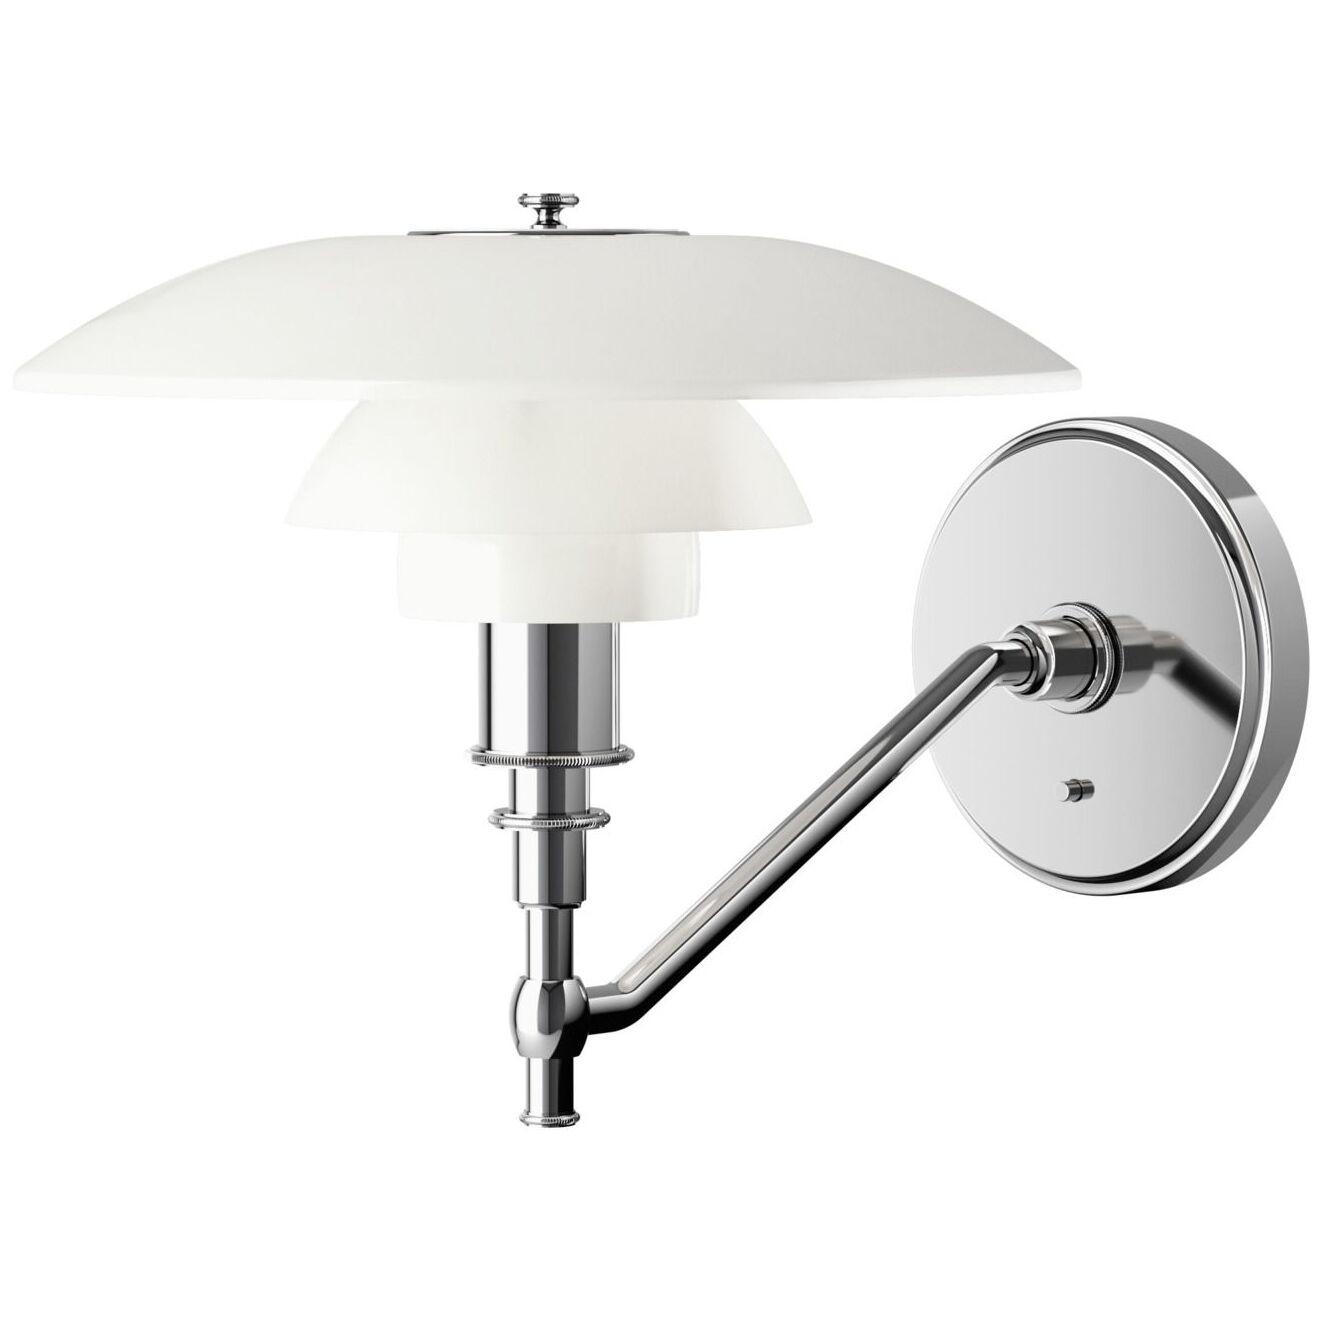 Poul Henningsen 'PH 3-2' Opaline Glass and Chrome Wall Lamp for Louis Poulsen